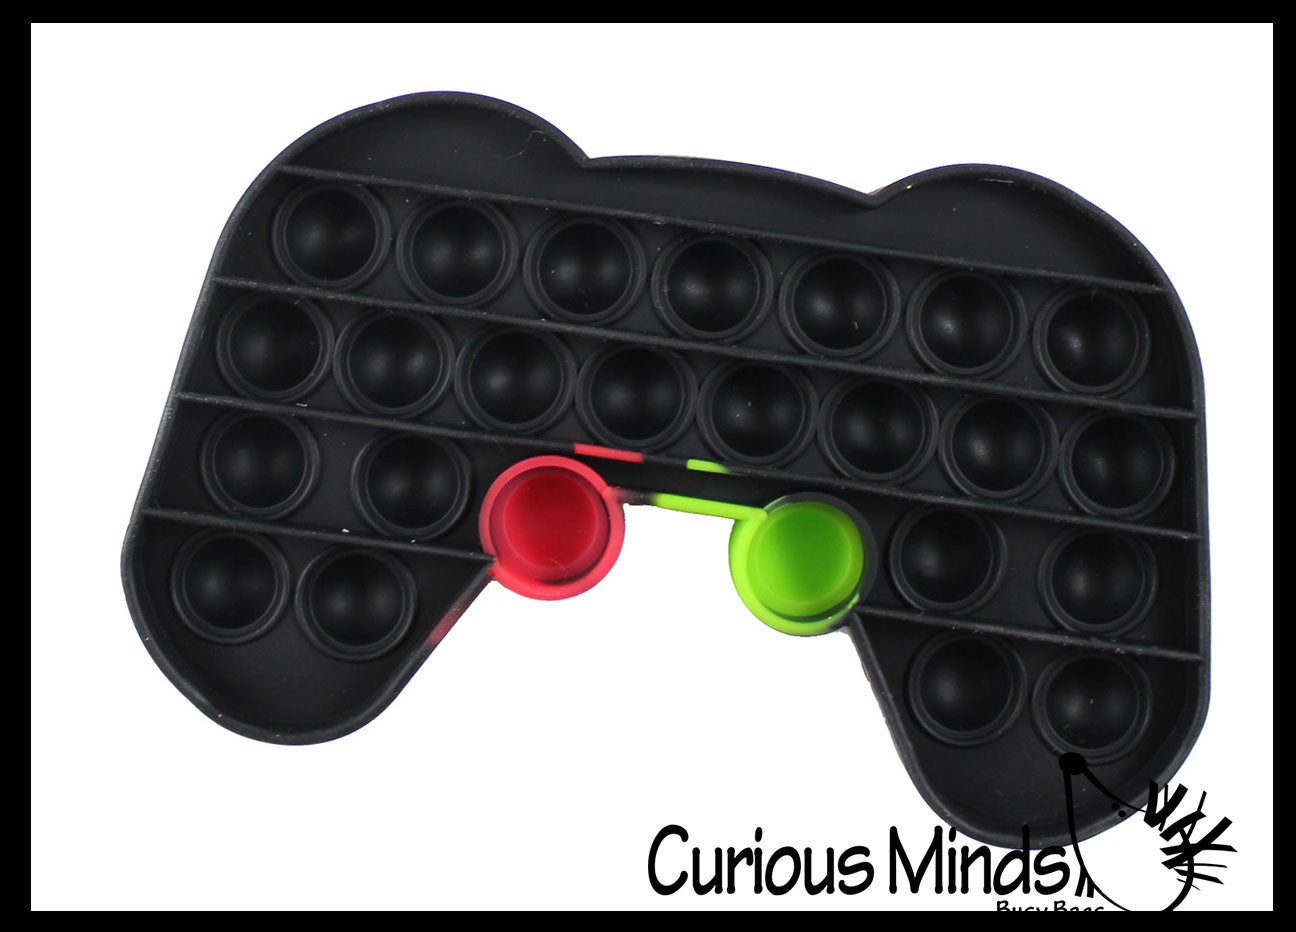 LAST CHANCE - LIMITED STOCK - SALE - Video Game Remote Controller Bubb